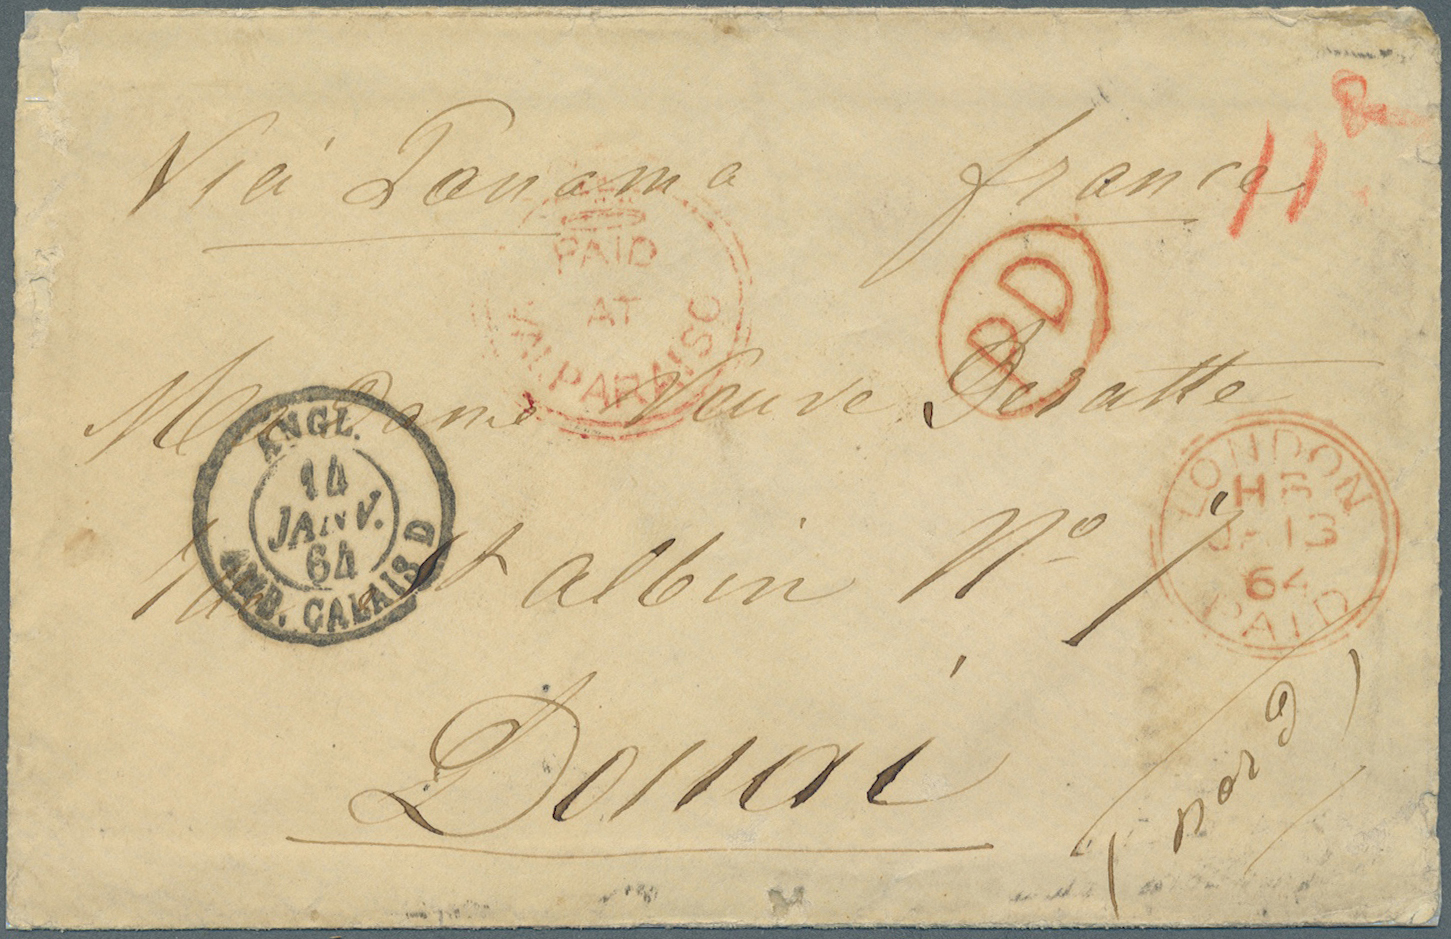 Br Chile: 1864, Stampless Folded Envelope Tied By Red Crown Mark "PAID AT VALPARAISO", Ms. "VIA PANAMA", Transit Mark Lo - Chili